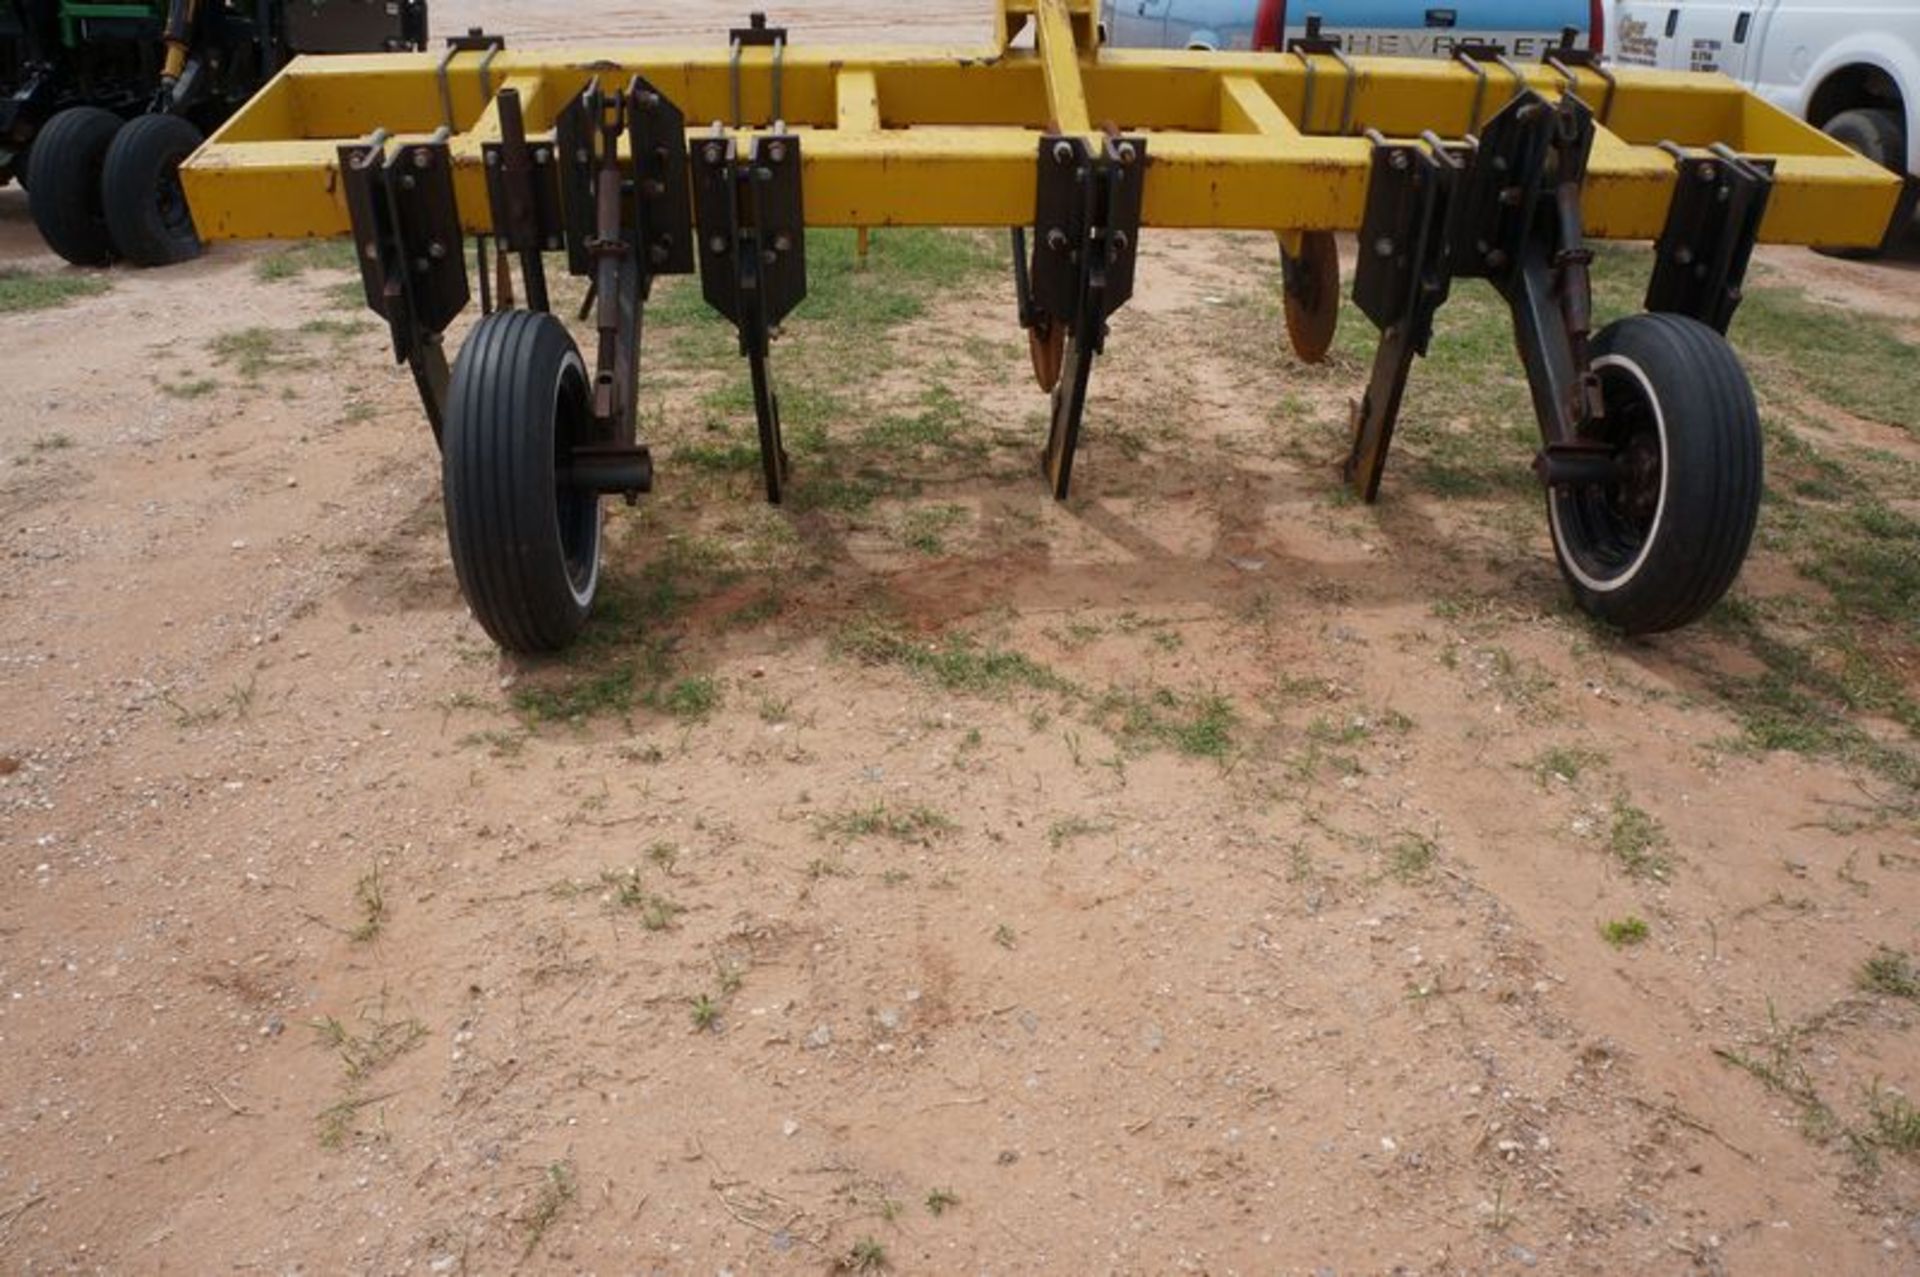 THE "MULCHER" BY AGRI-PRODUCTS 6-RIPPERS W/CUTTERS 3 PT. - Image 3 of 3